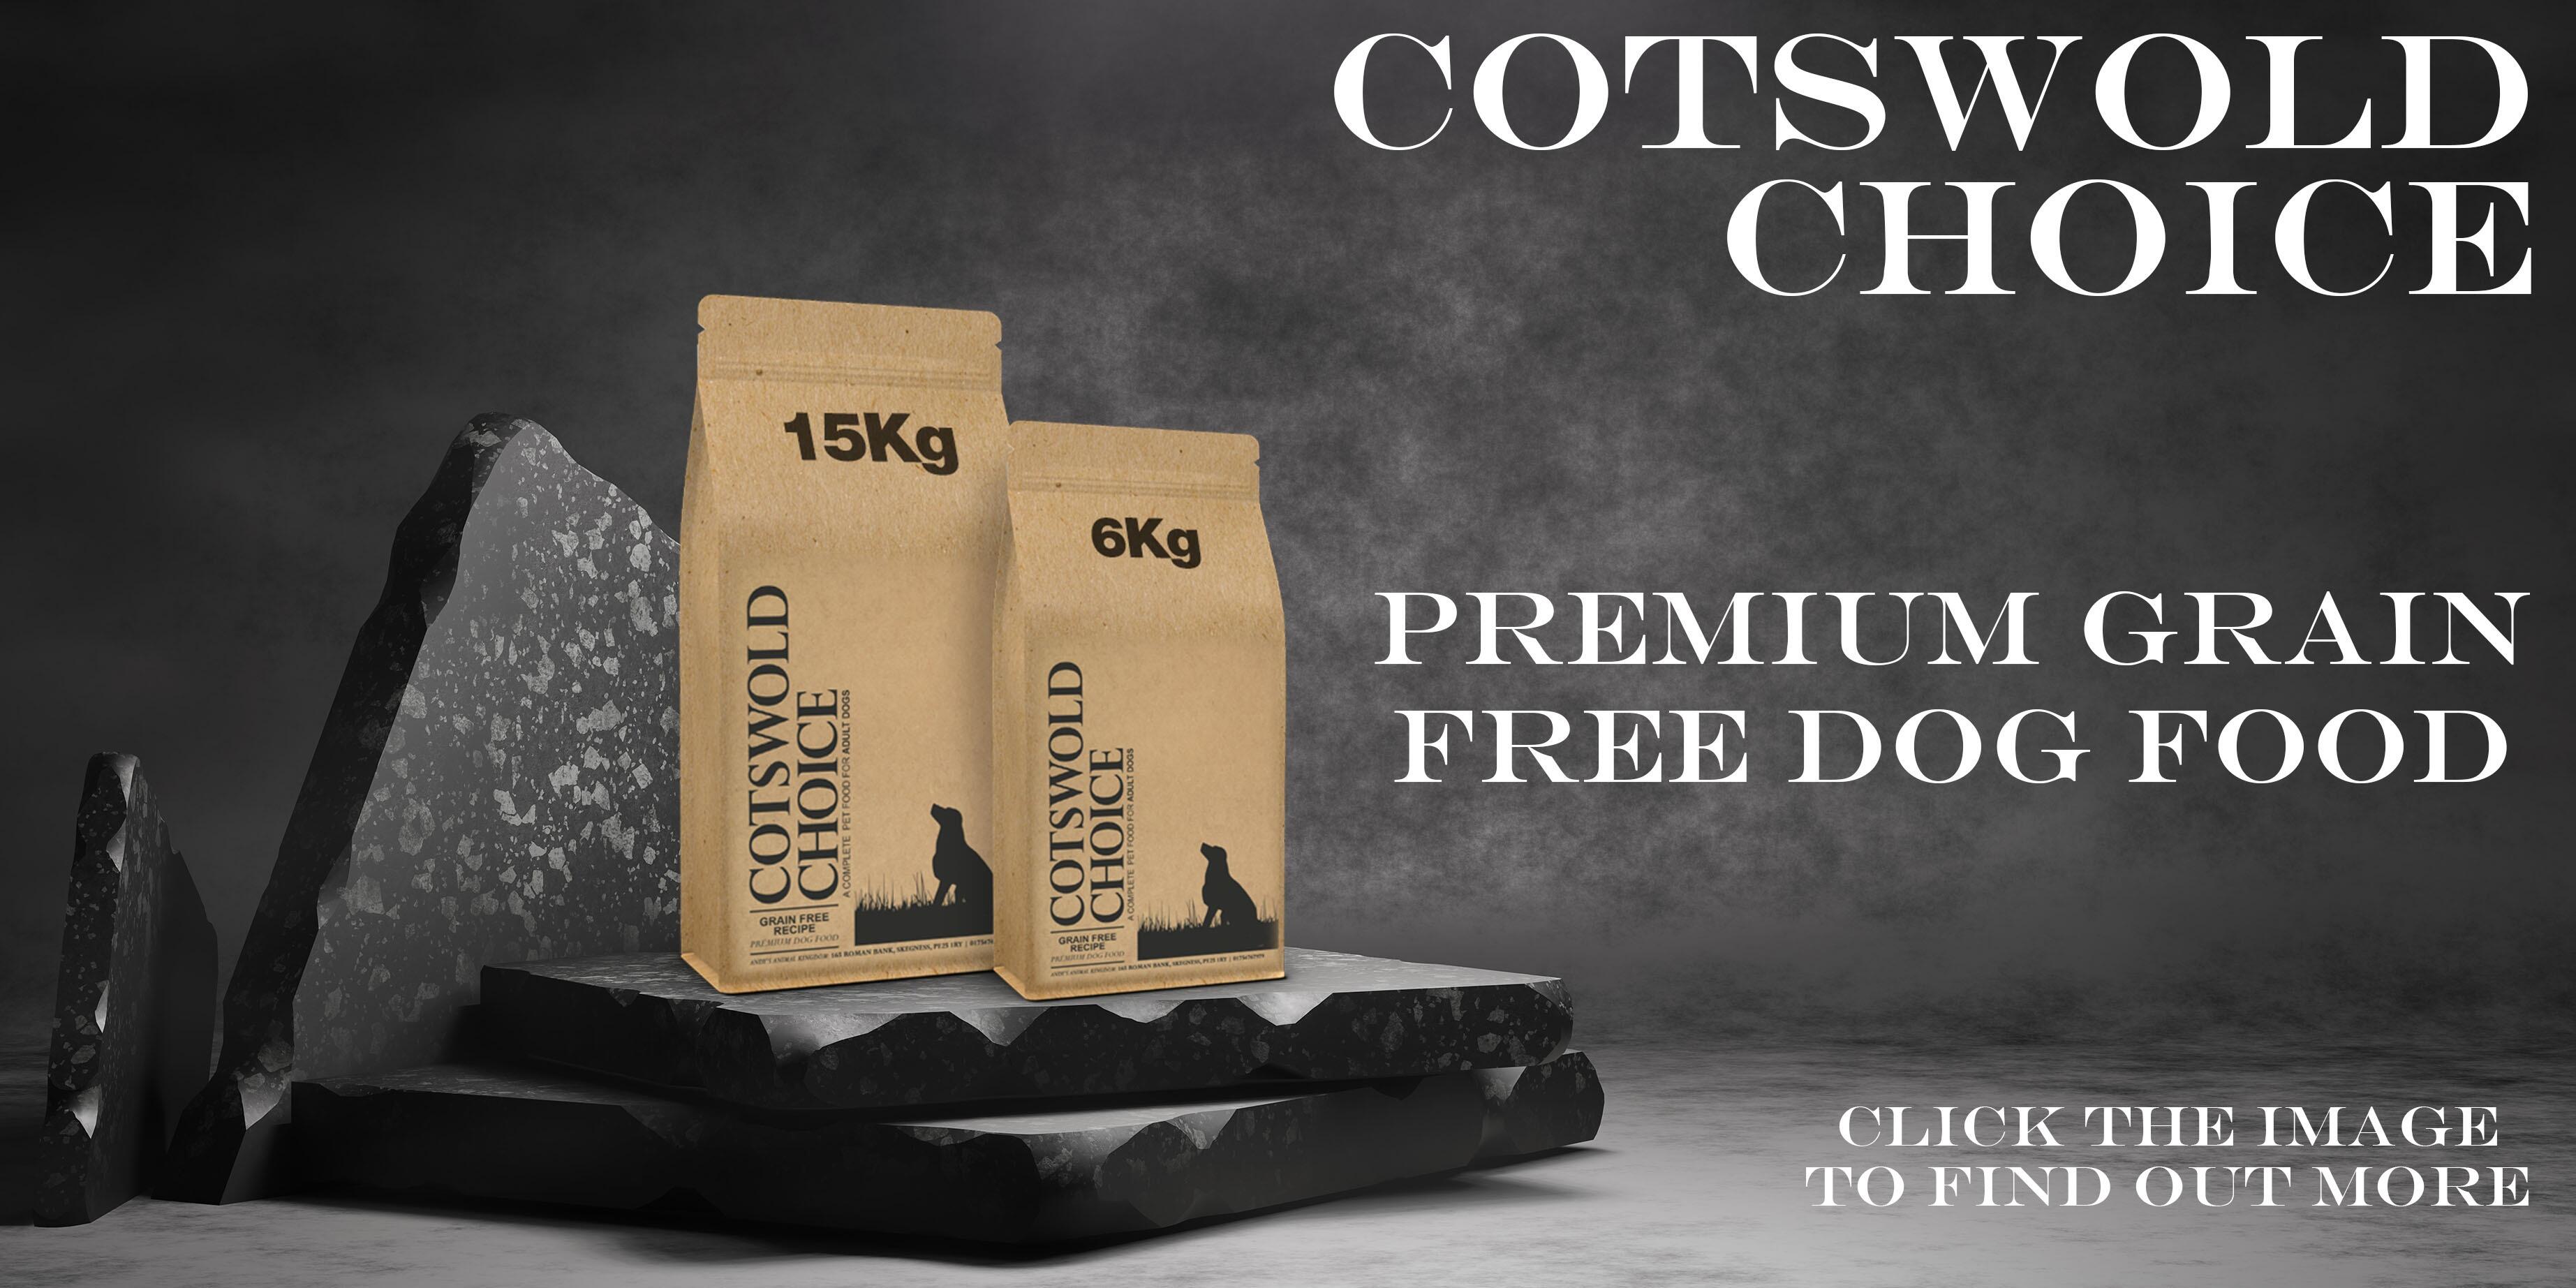 Cotswold Choice Grain Free Dog Food